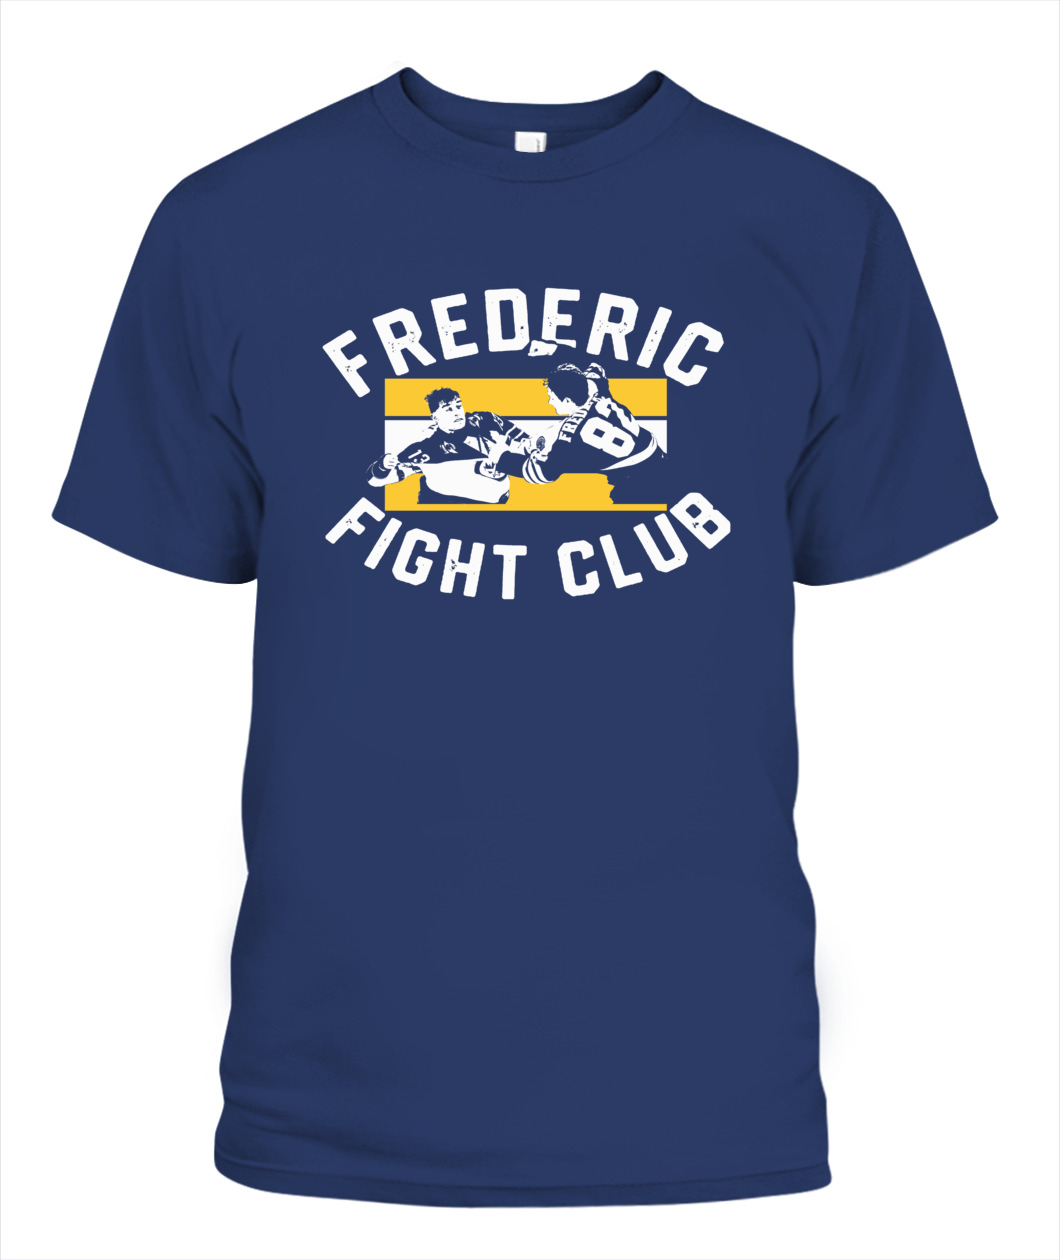 Trent Frederic Jerseys, Trent Frederic Shirts, Apparel, Gear